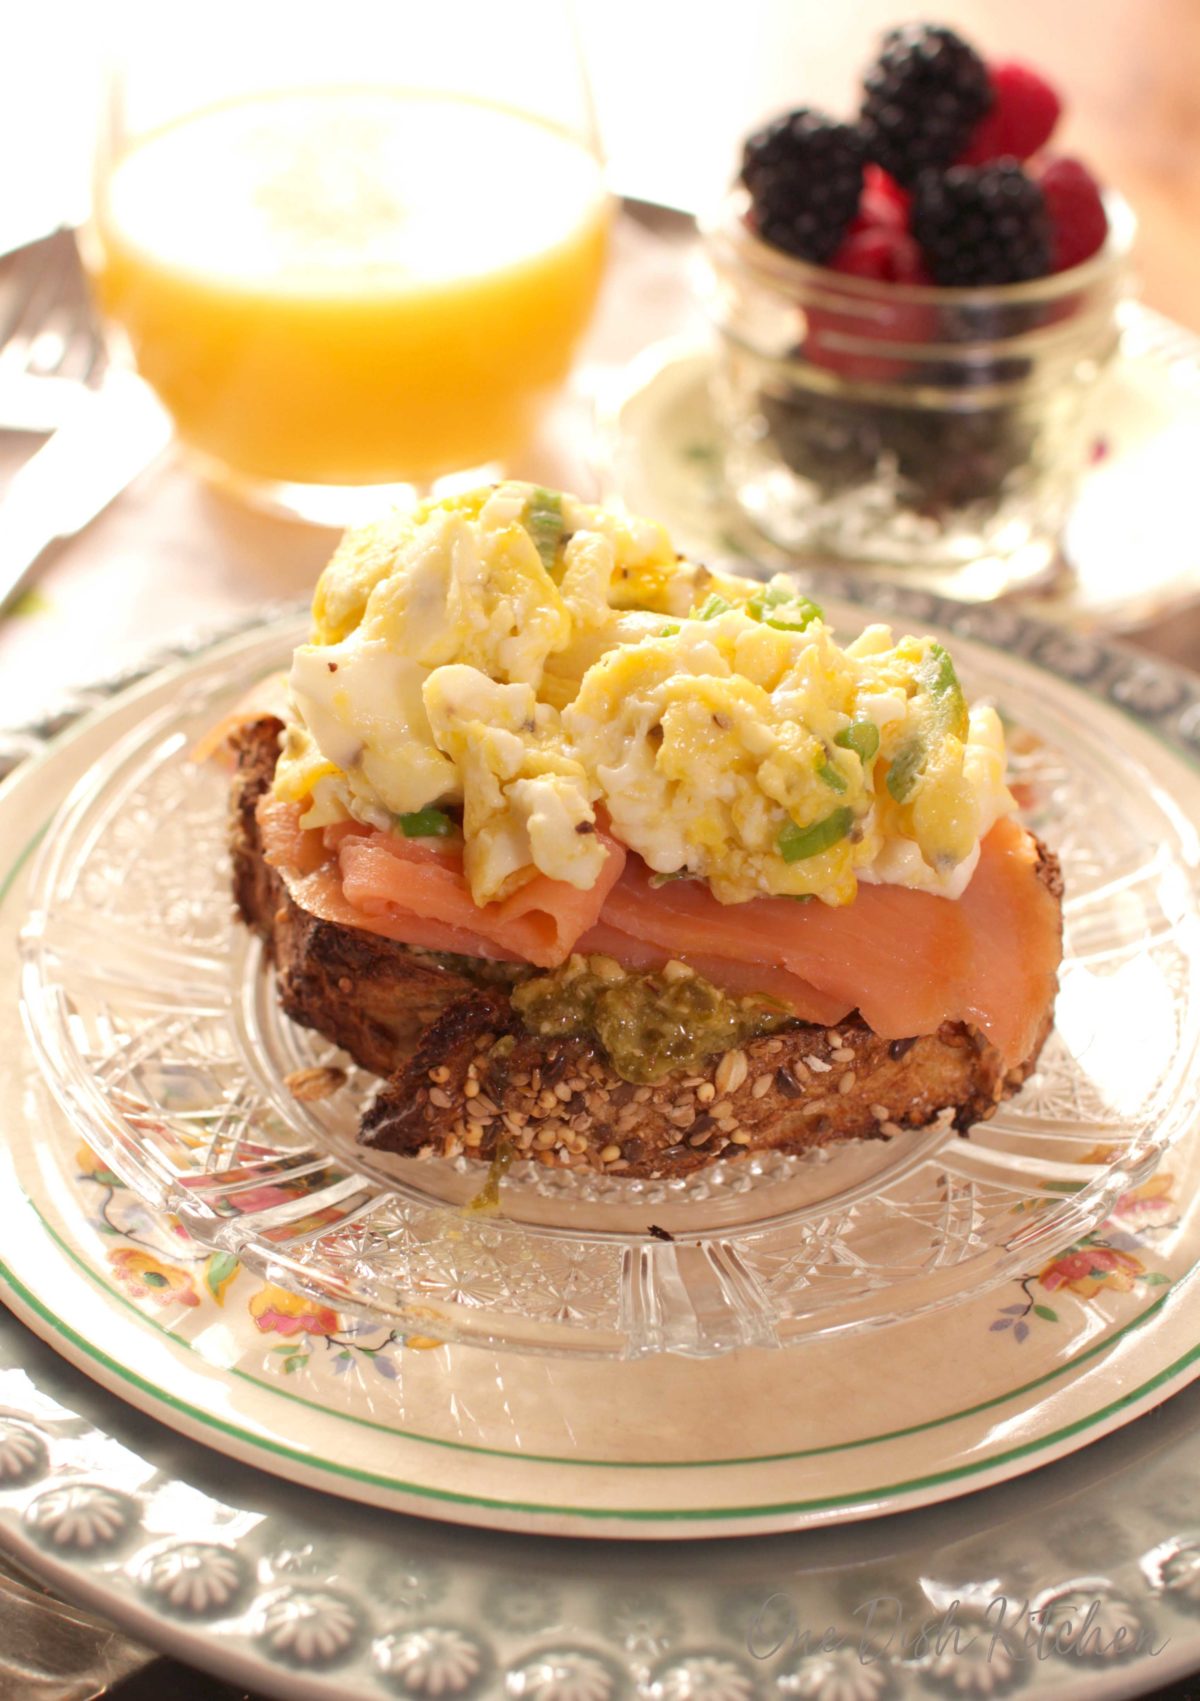 smoked salmon over a layer of pesto on a small piece of french bread topped with scrambled eggs